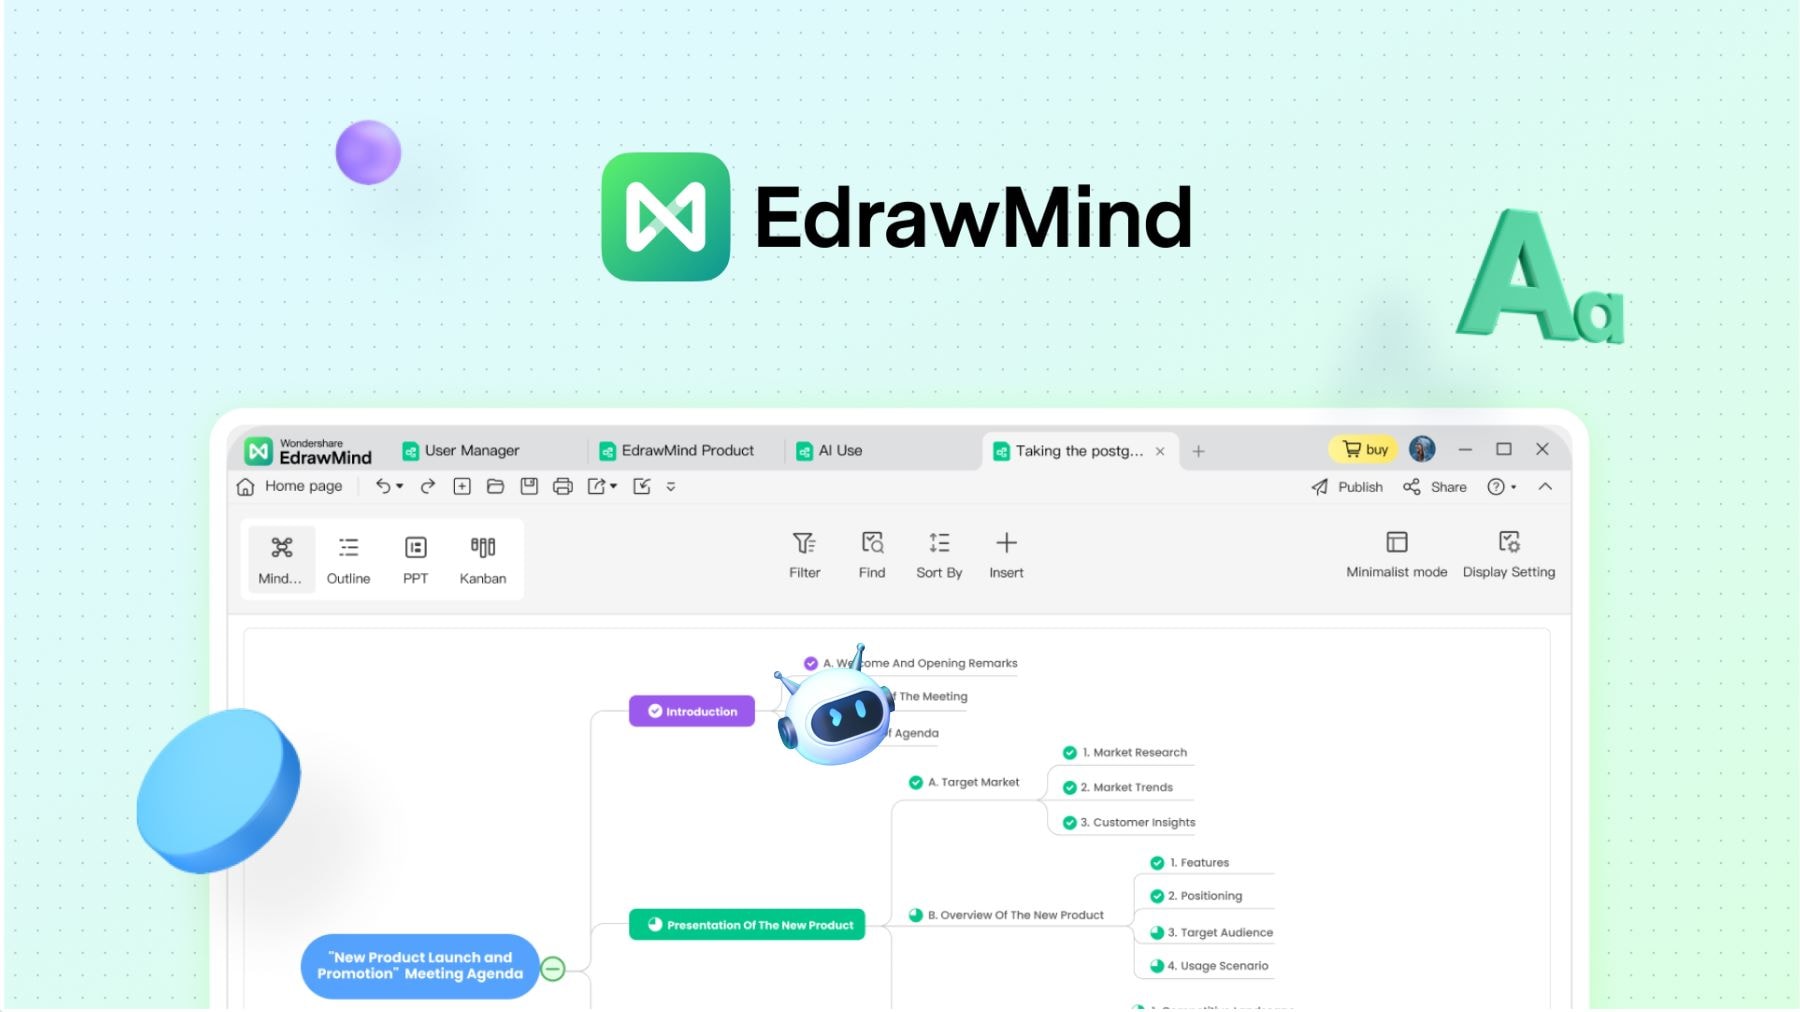 edrawmind home page displayed